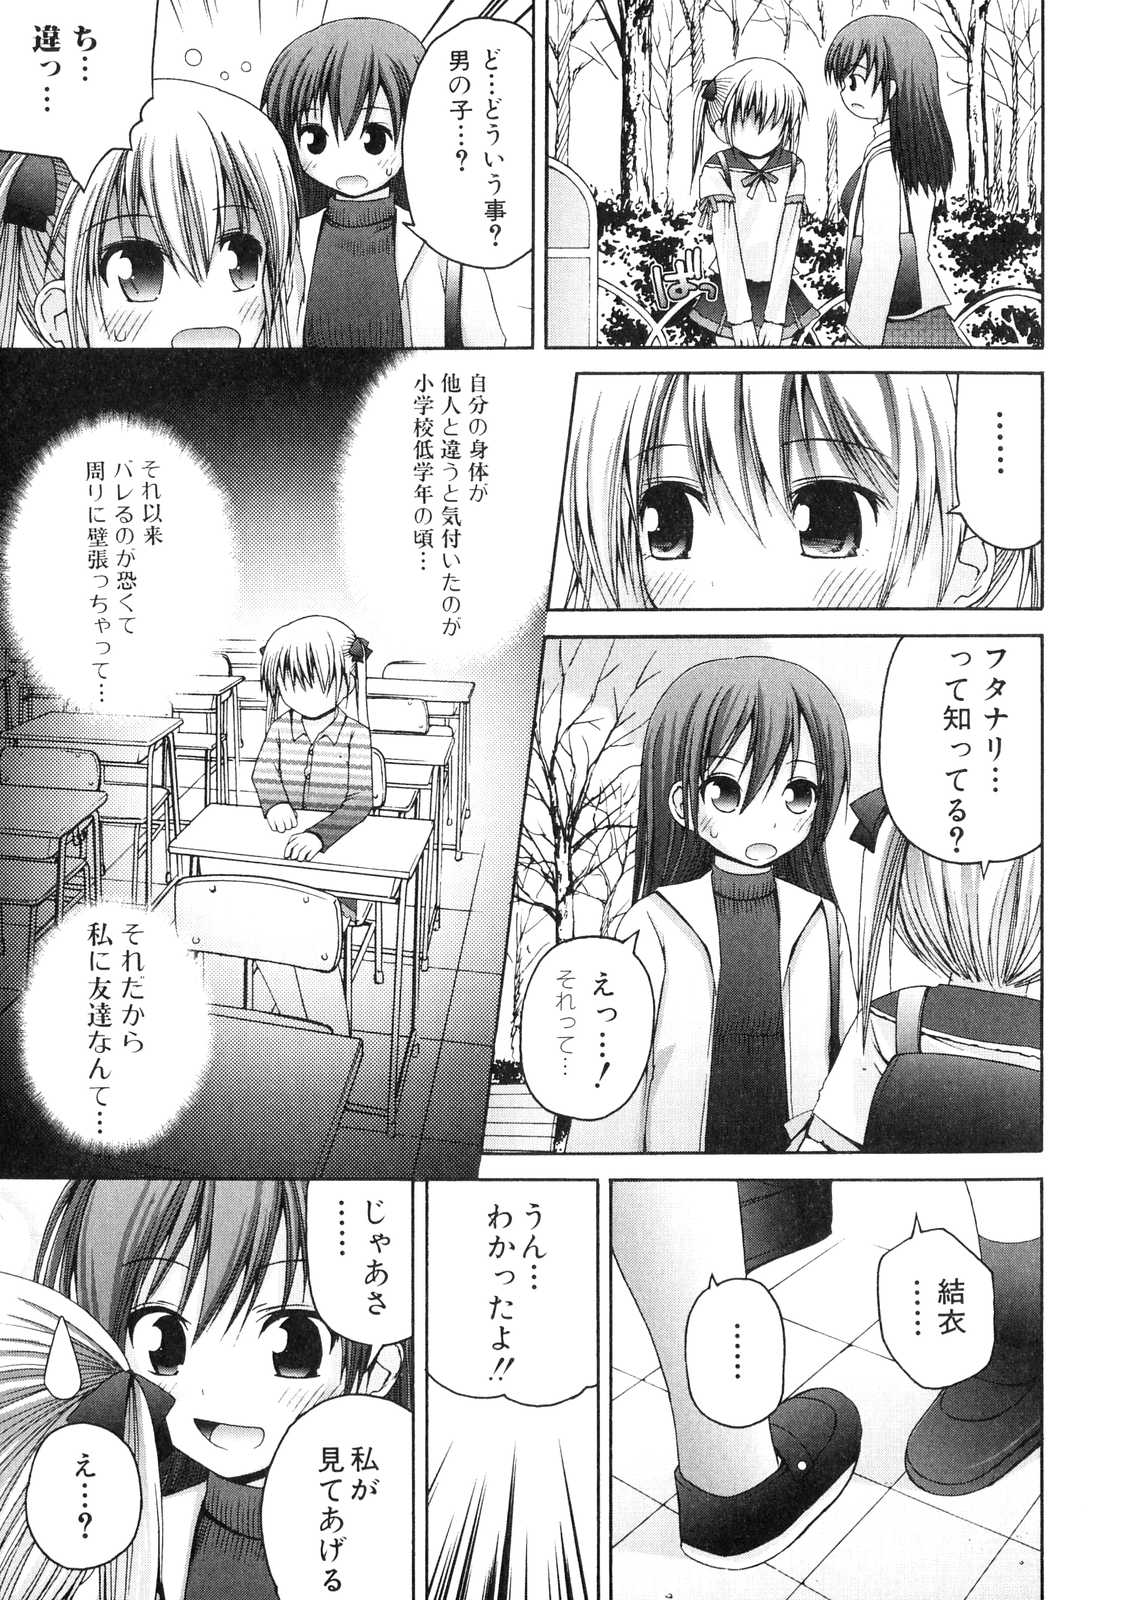 yui PureHeart page 5 full